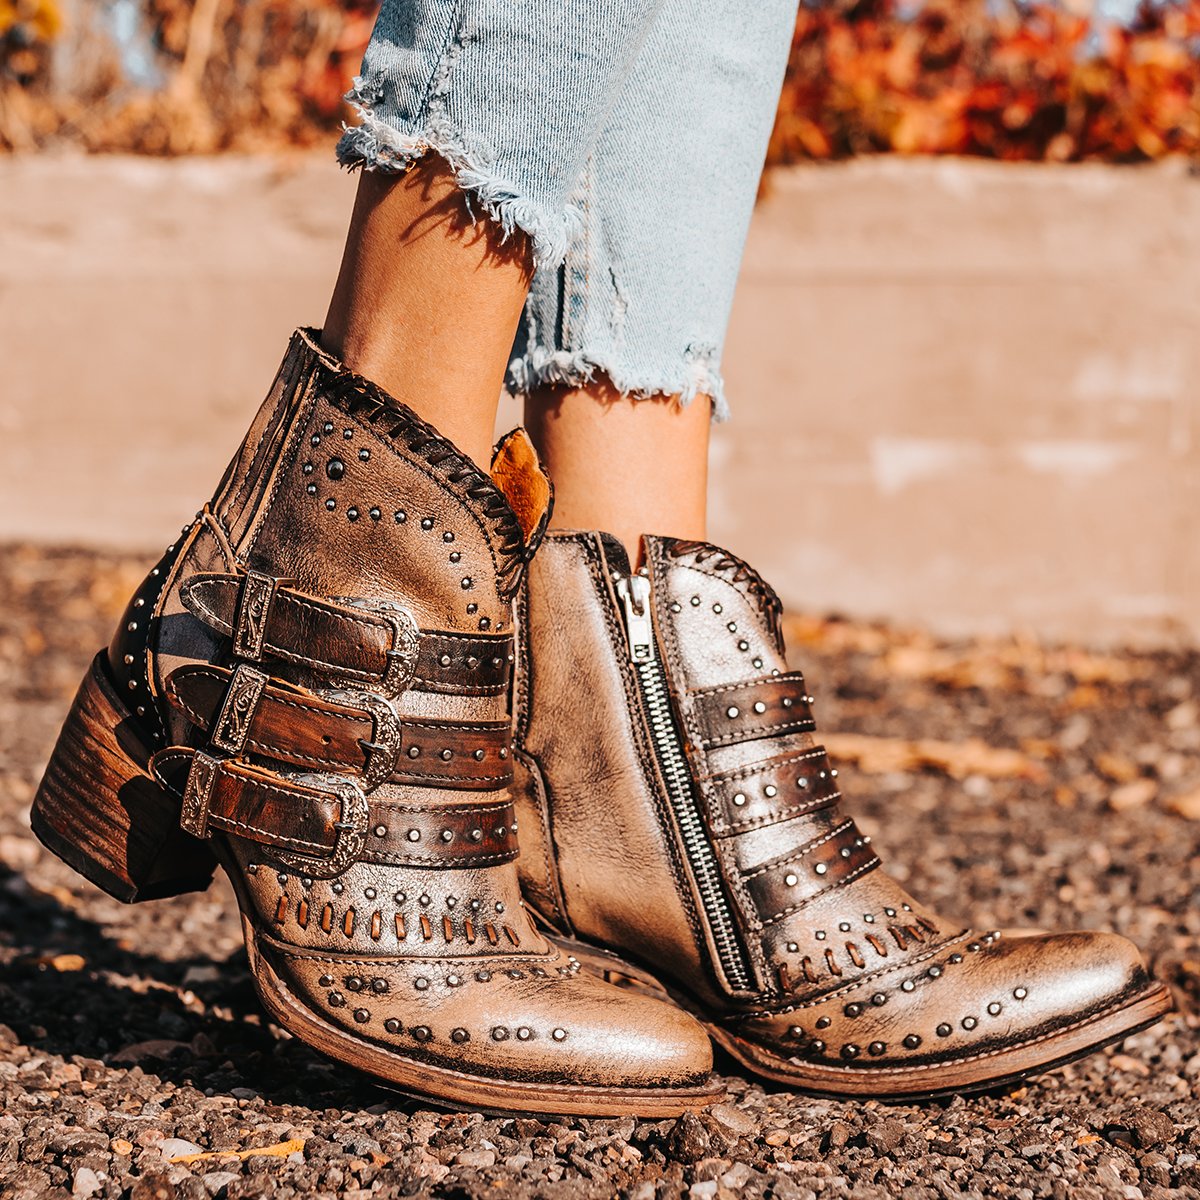 FREEBIRD women's Savanna pewter leather ankle bootie with silver studs, elastic gore, and metal buckles